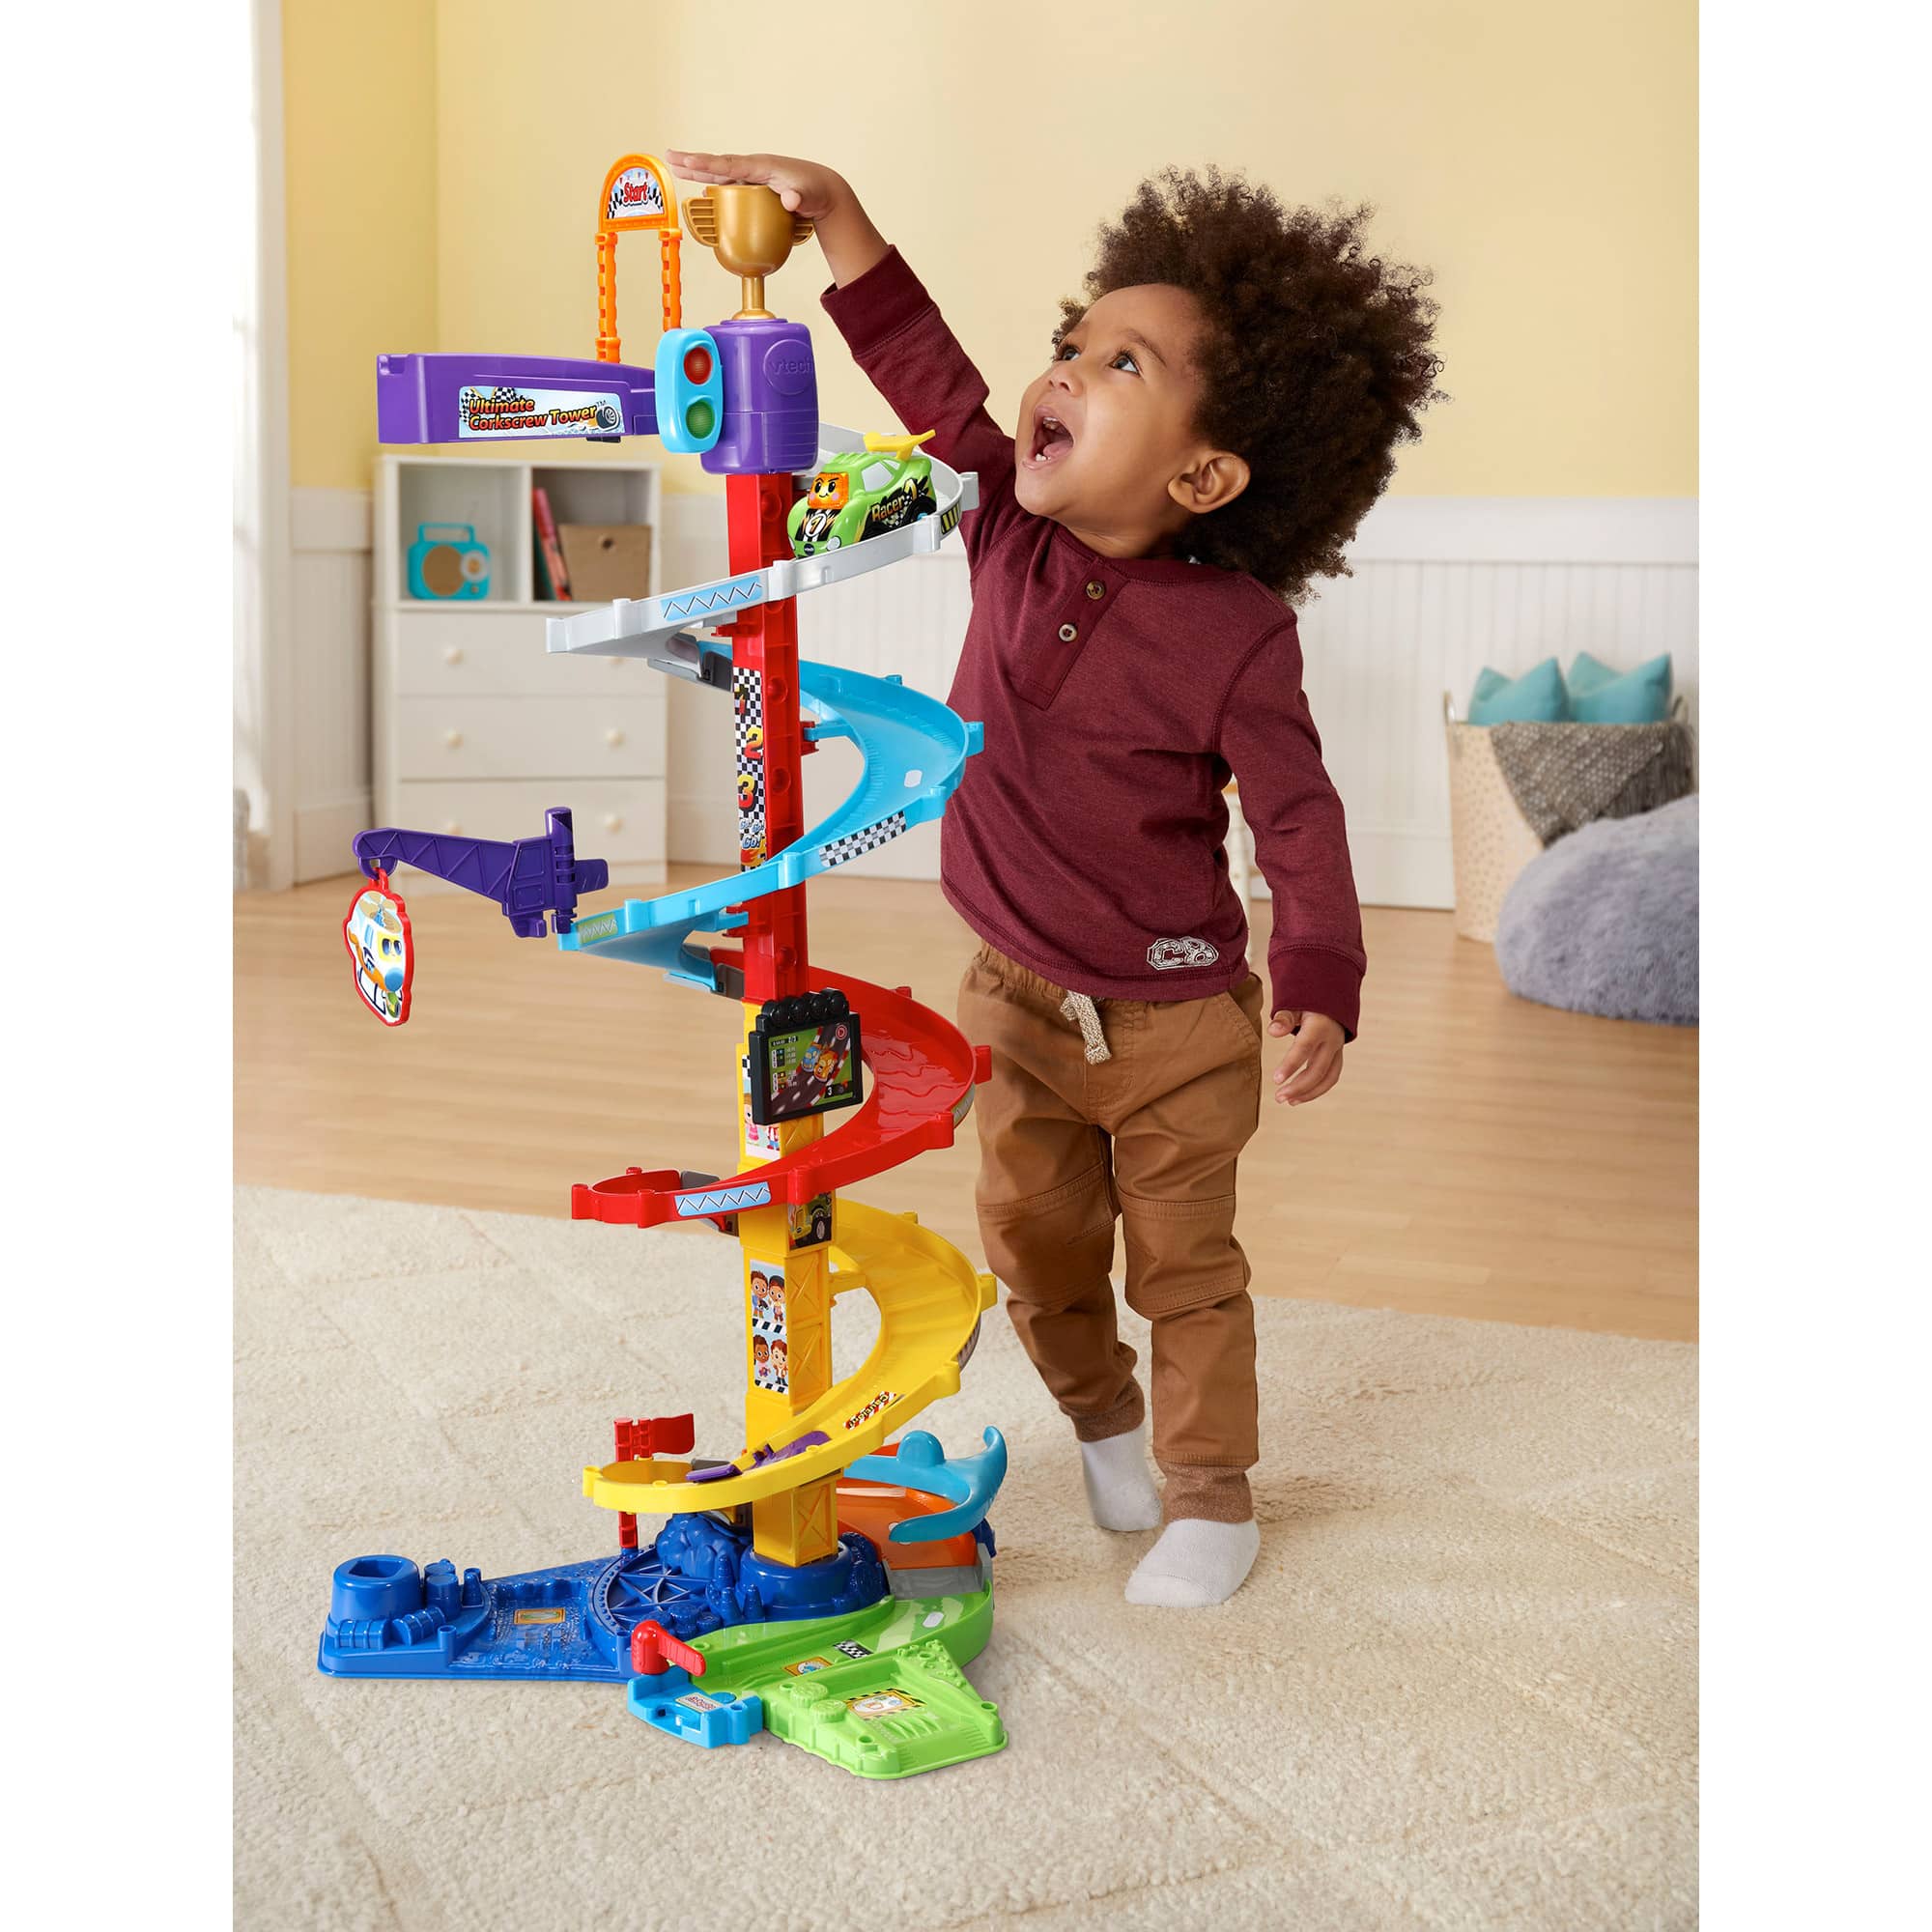 12 + Months VTech Toot Toot Drivers Twist And Race Tower 